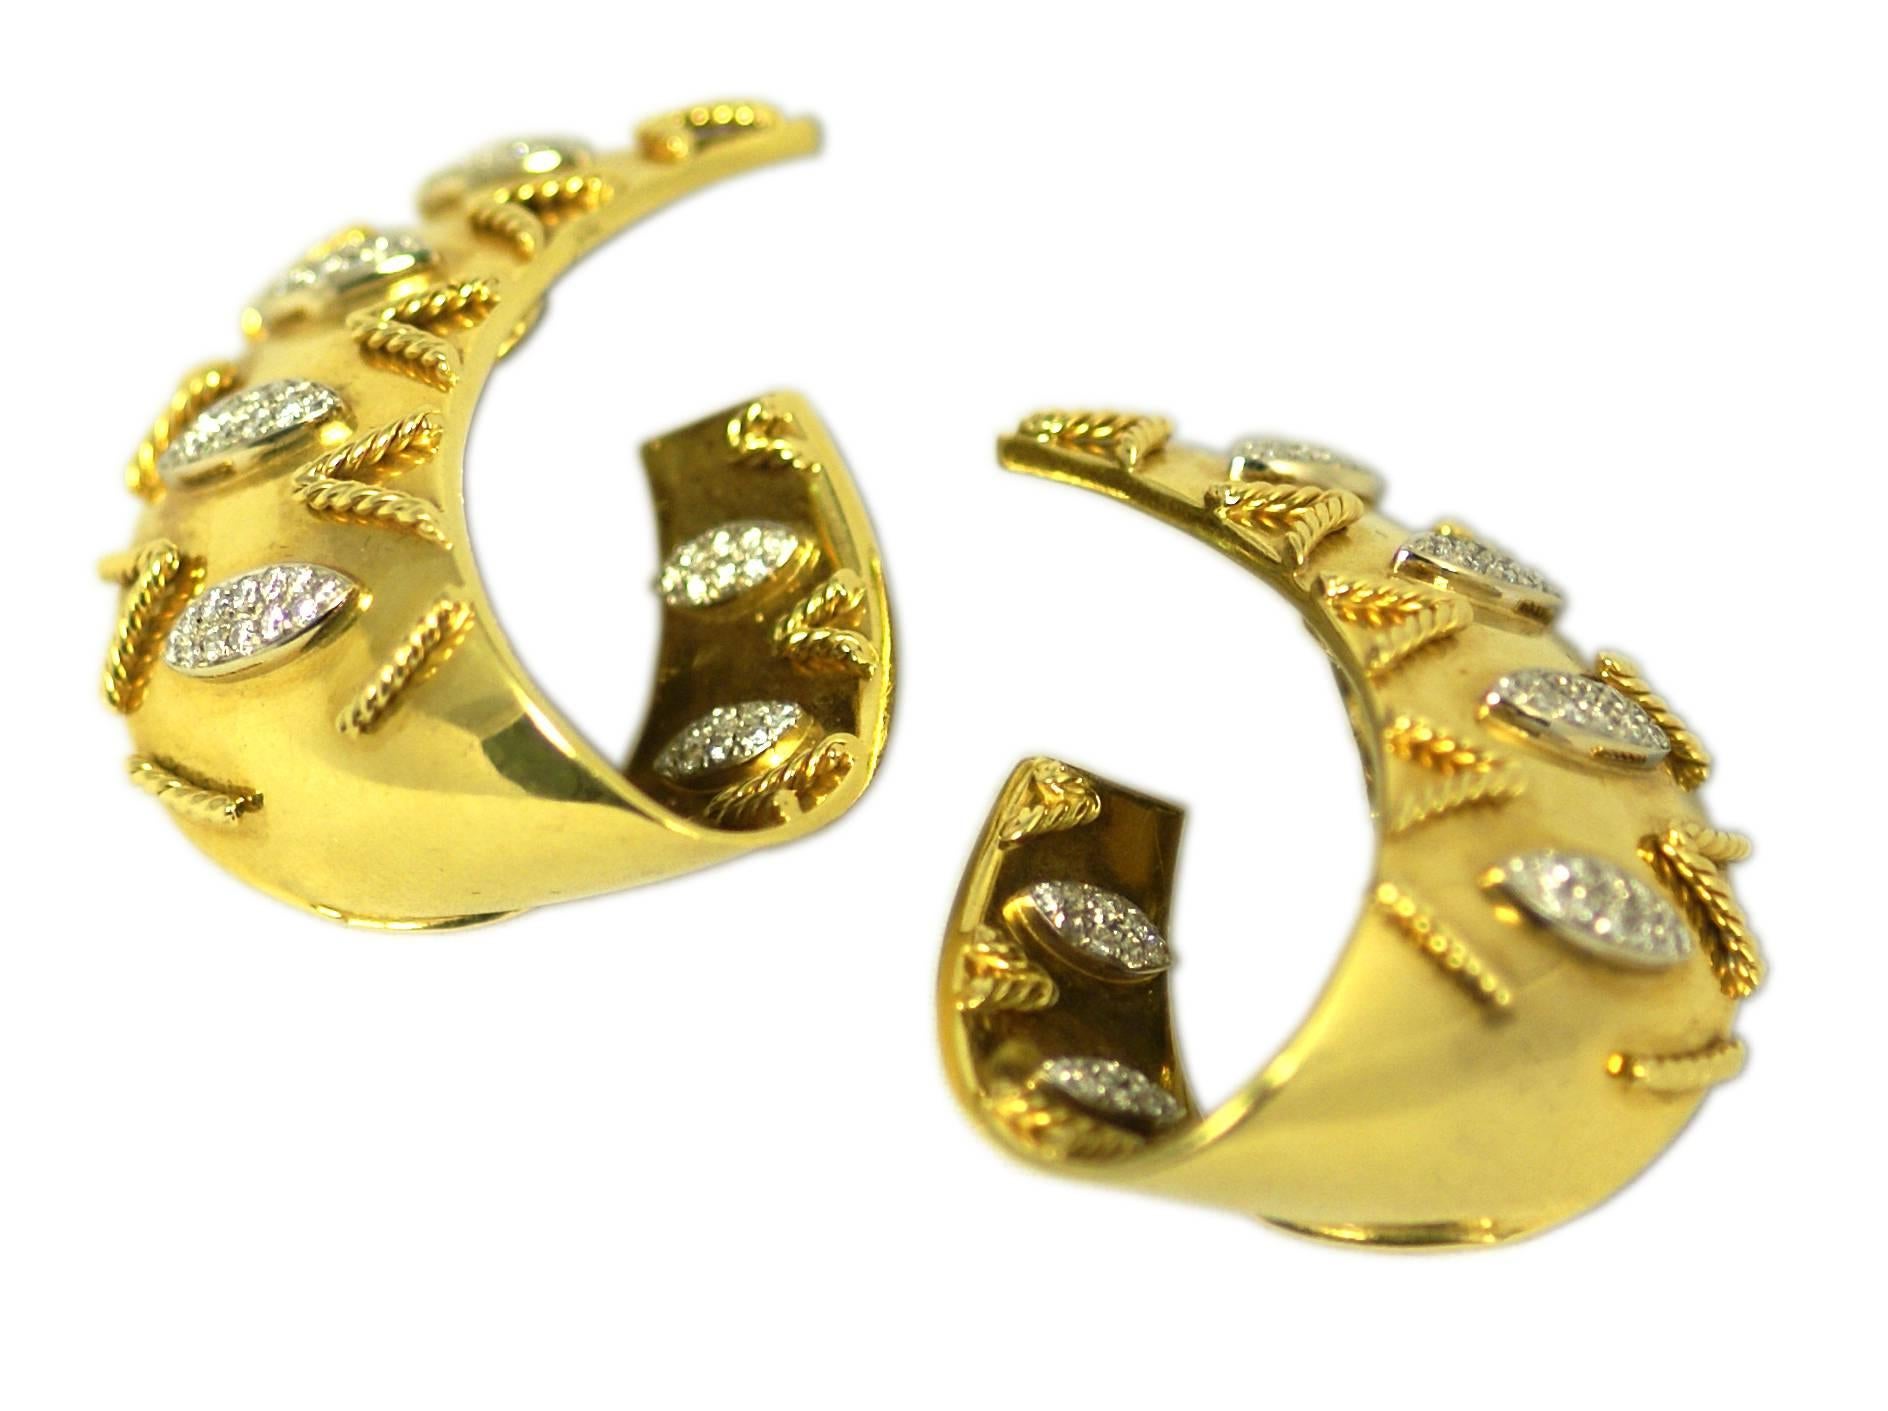 A pair of groovy 18kt yellow gold hoop shaped earclips, highlighted with rope and diamond decorations. Made in Italy, circa 1970.